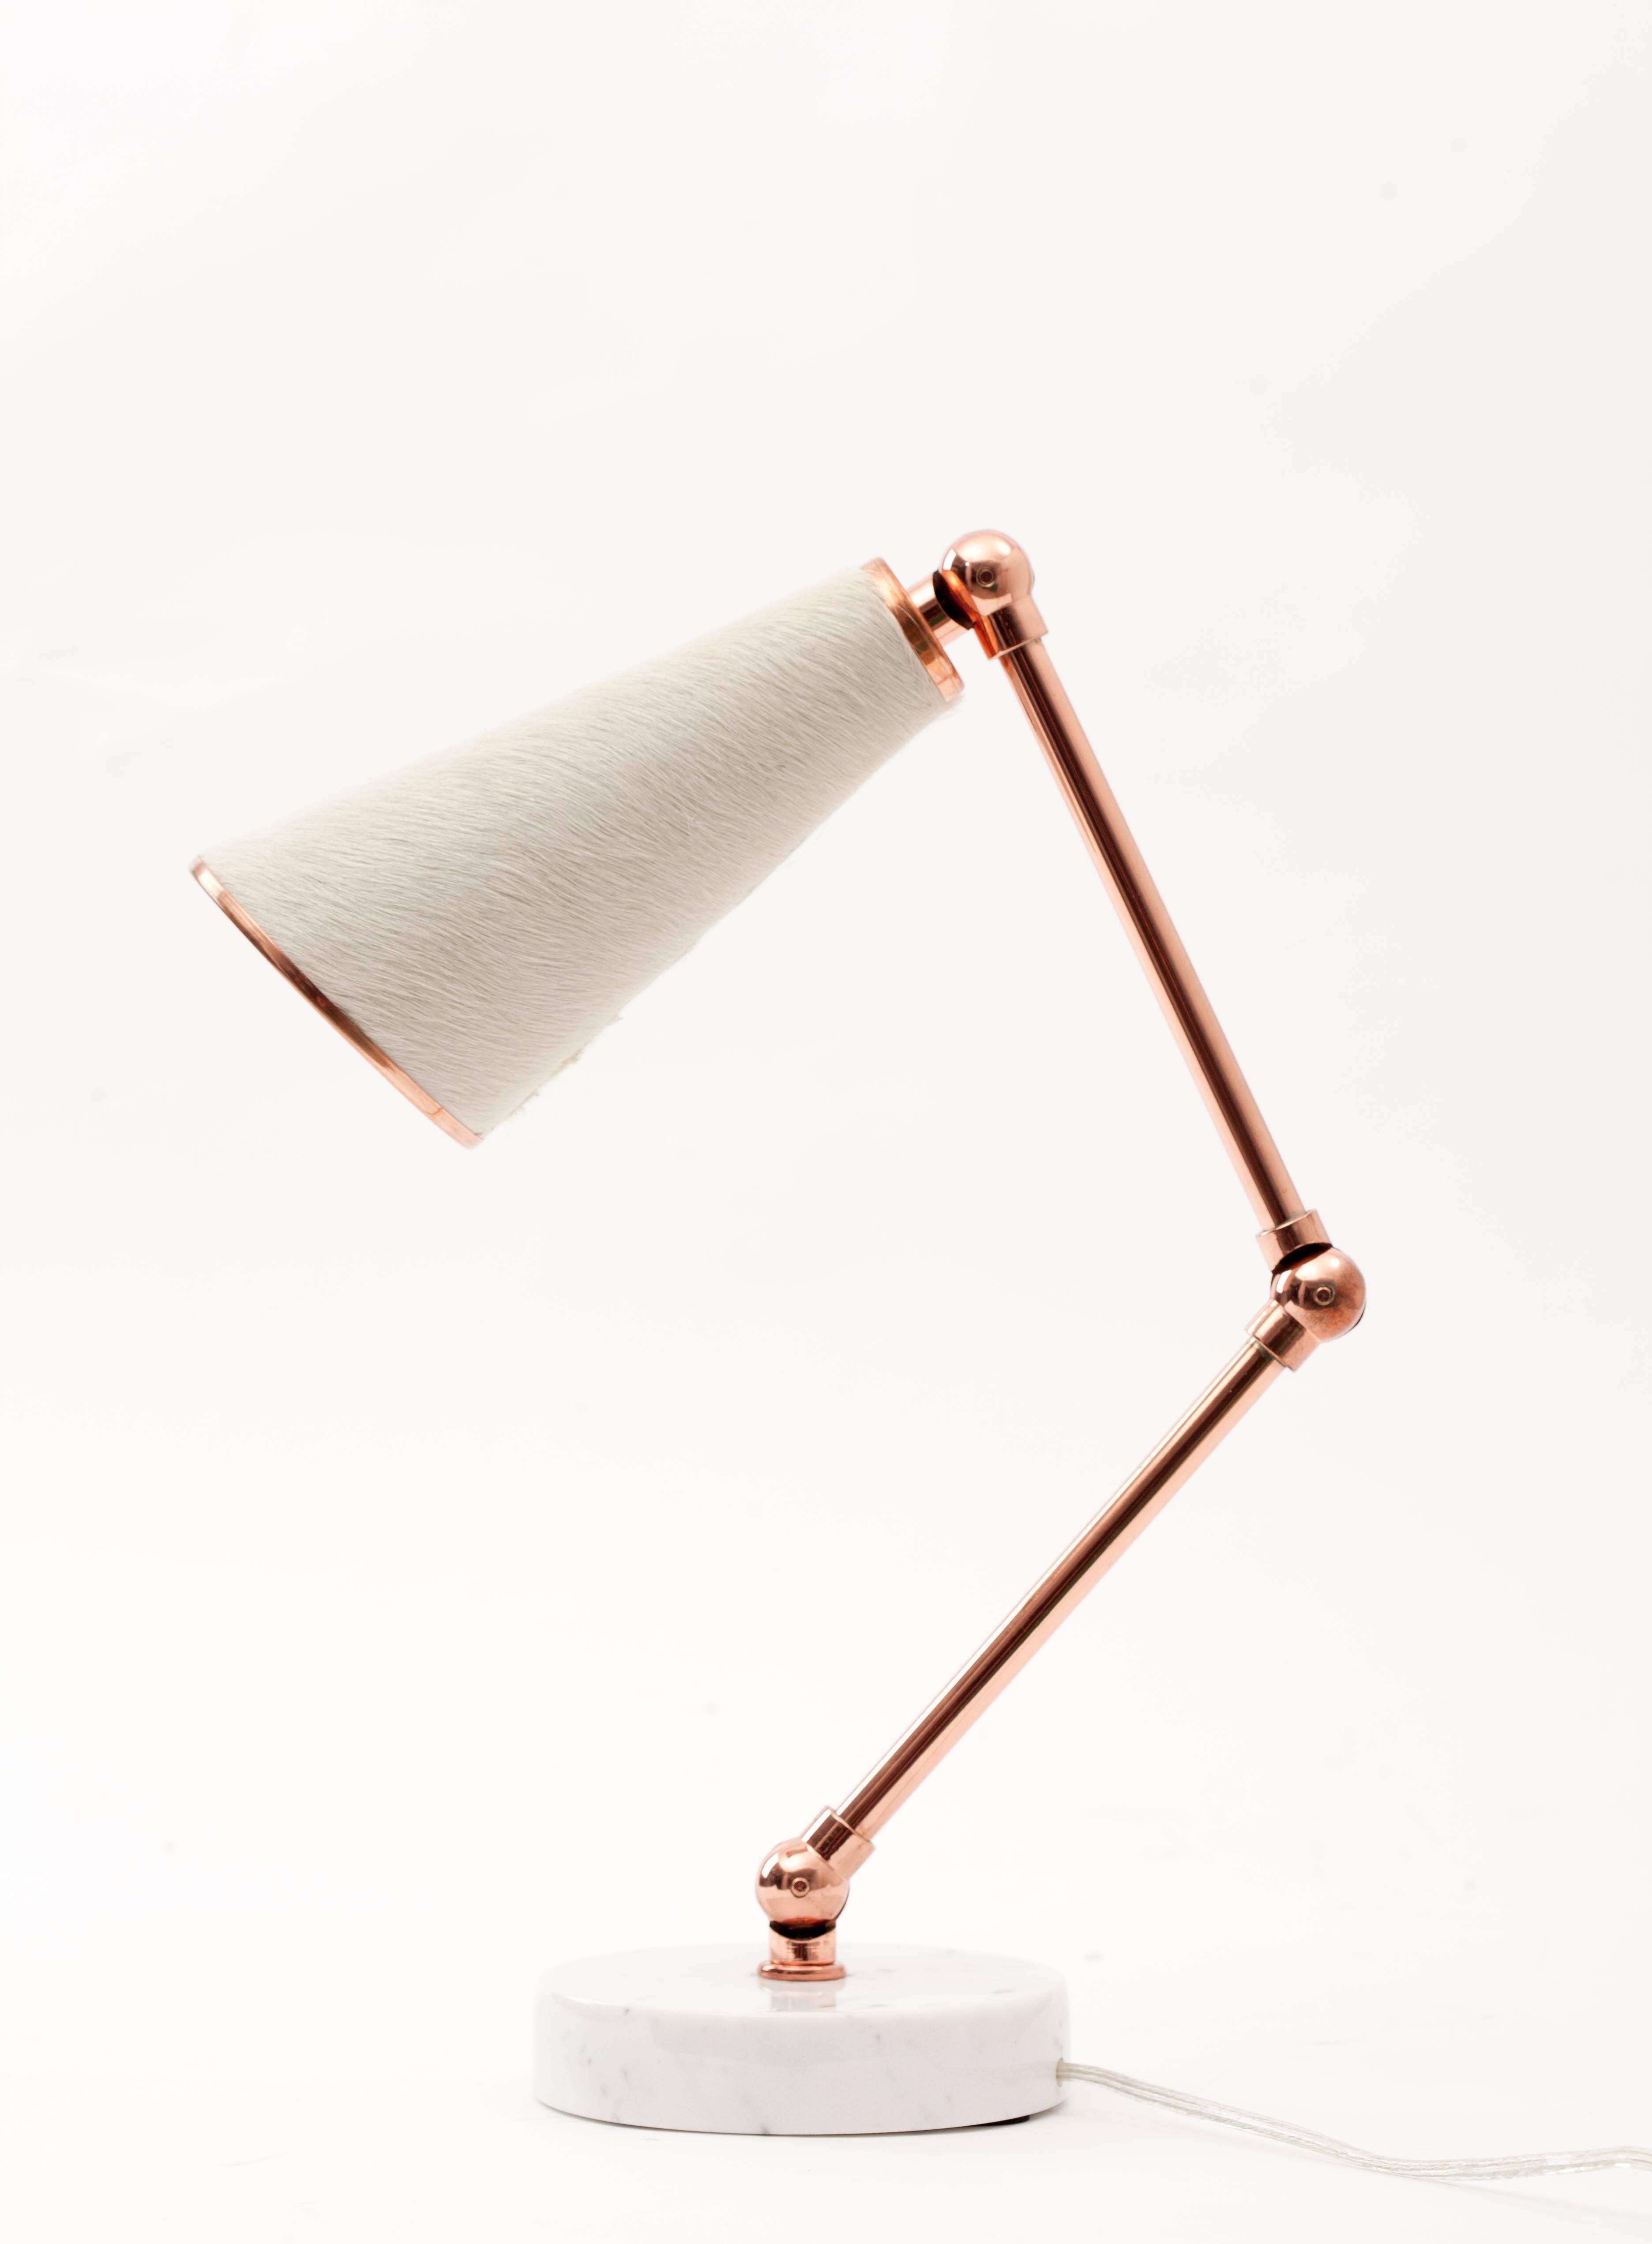 Lanterna Table Lamp in Carrara Marble, Cork and Copper with Adjustable Arms  im Angebot 6